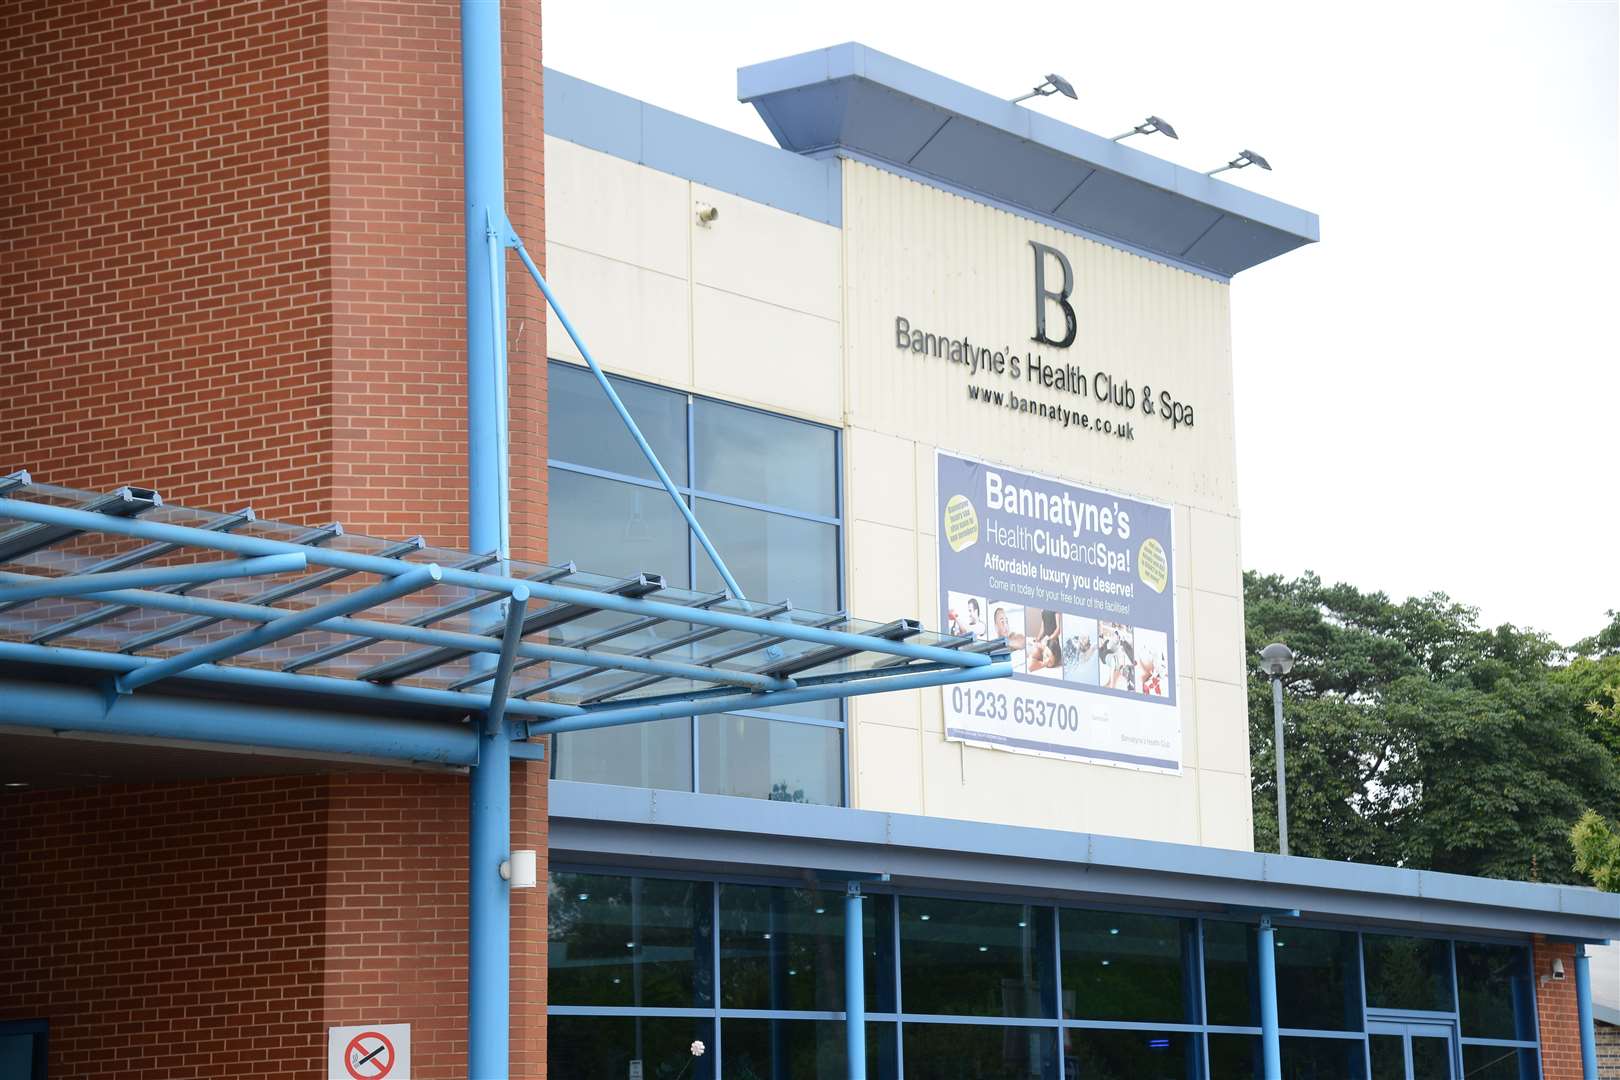 Bannatyne's health centre in Ashford is among the dozens of businesses reopening across the county